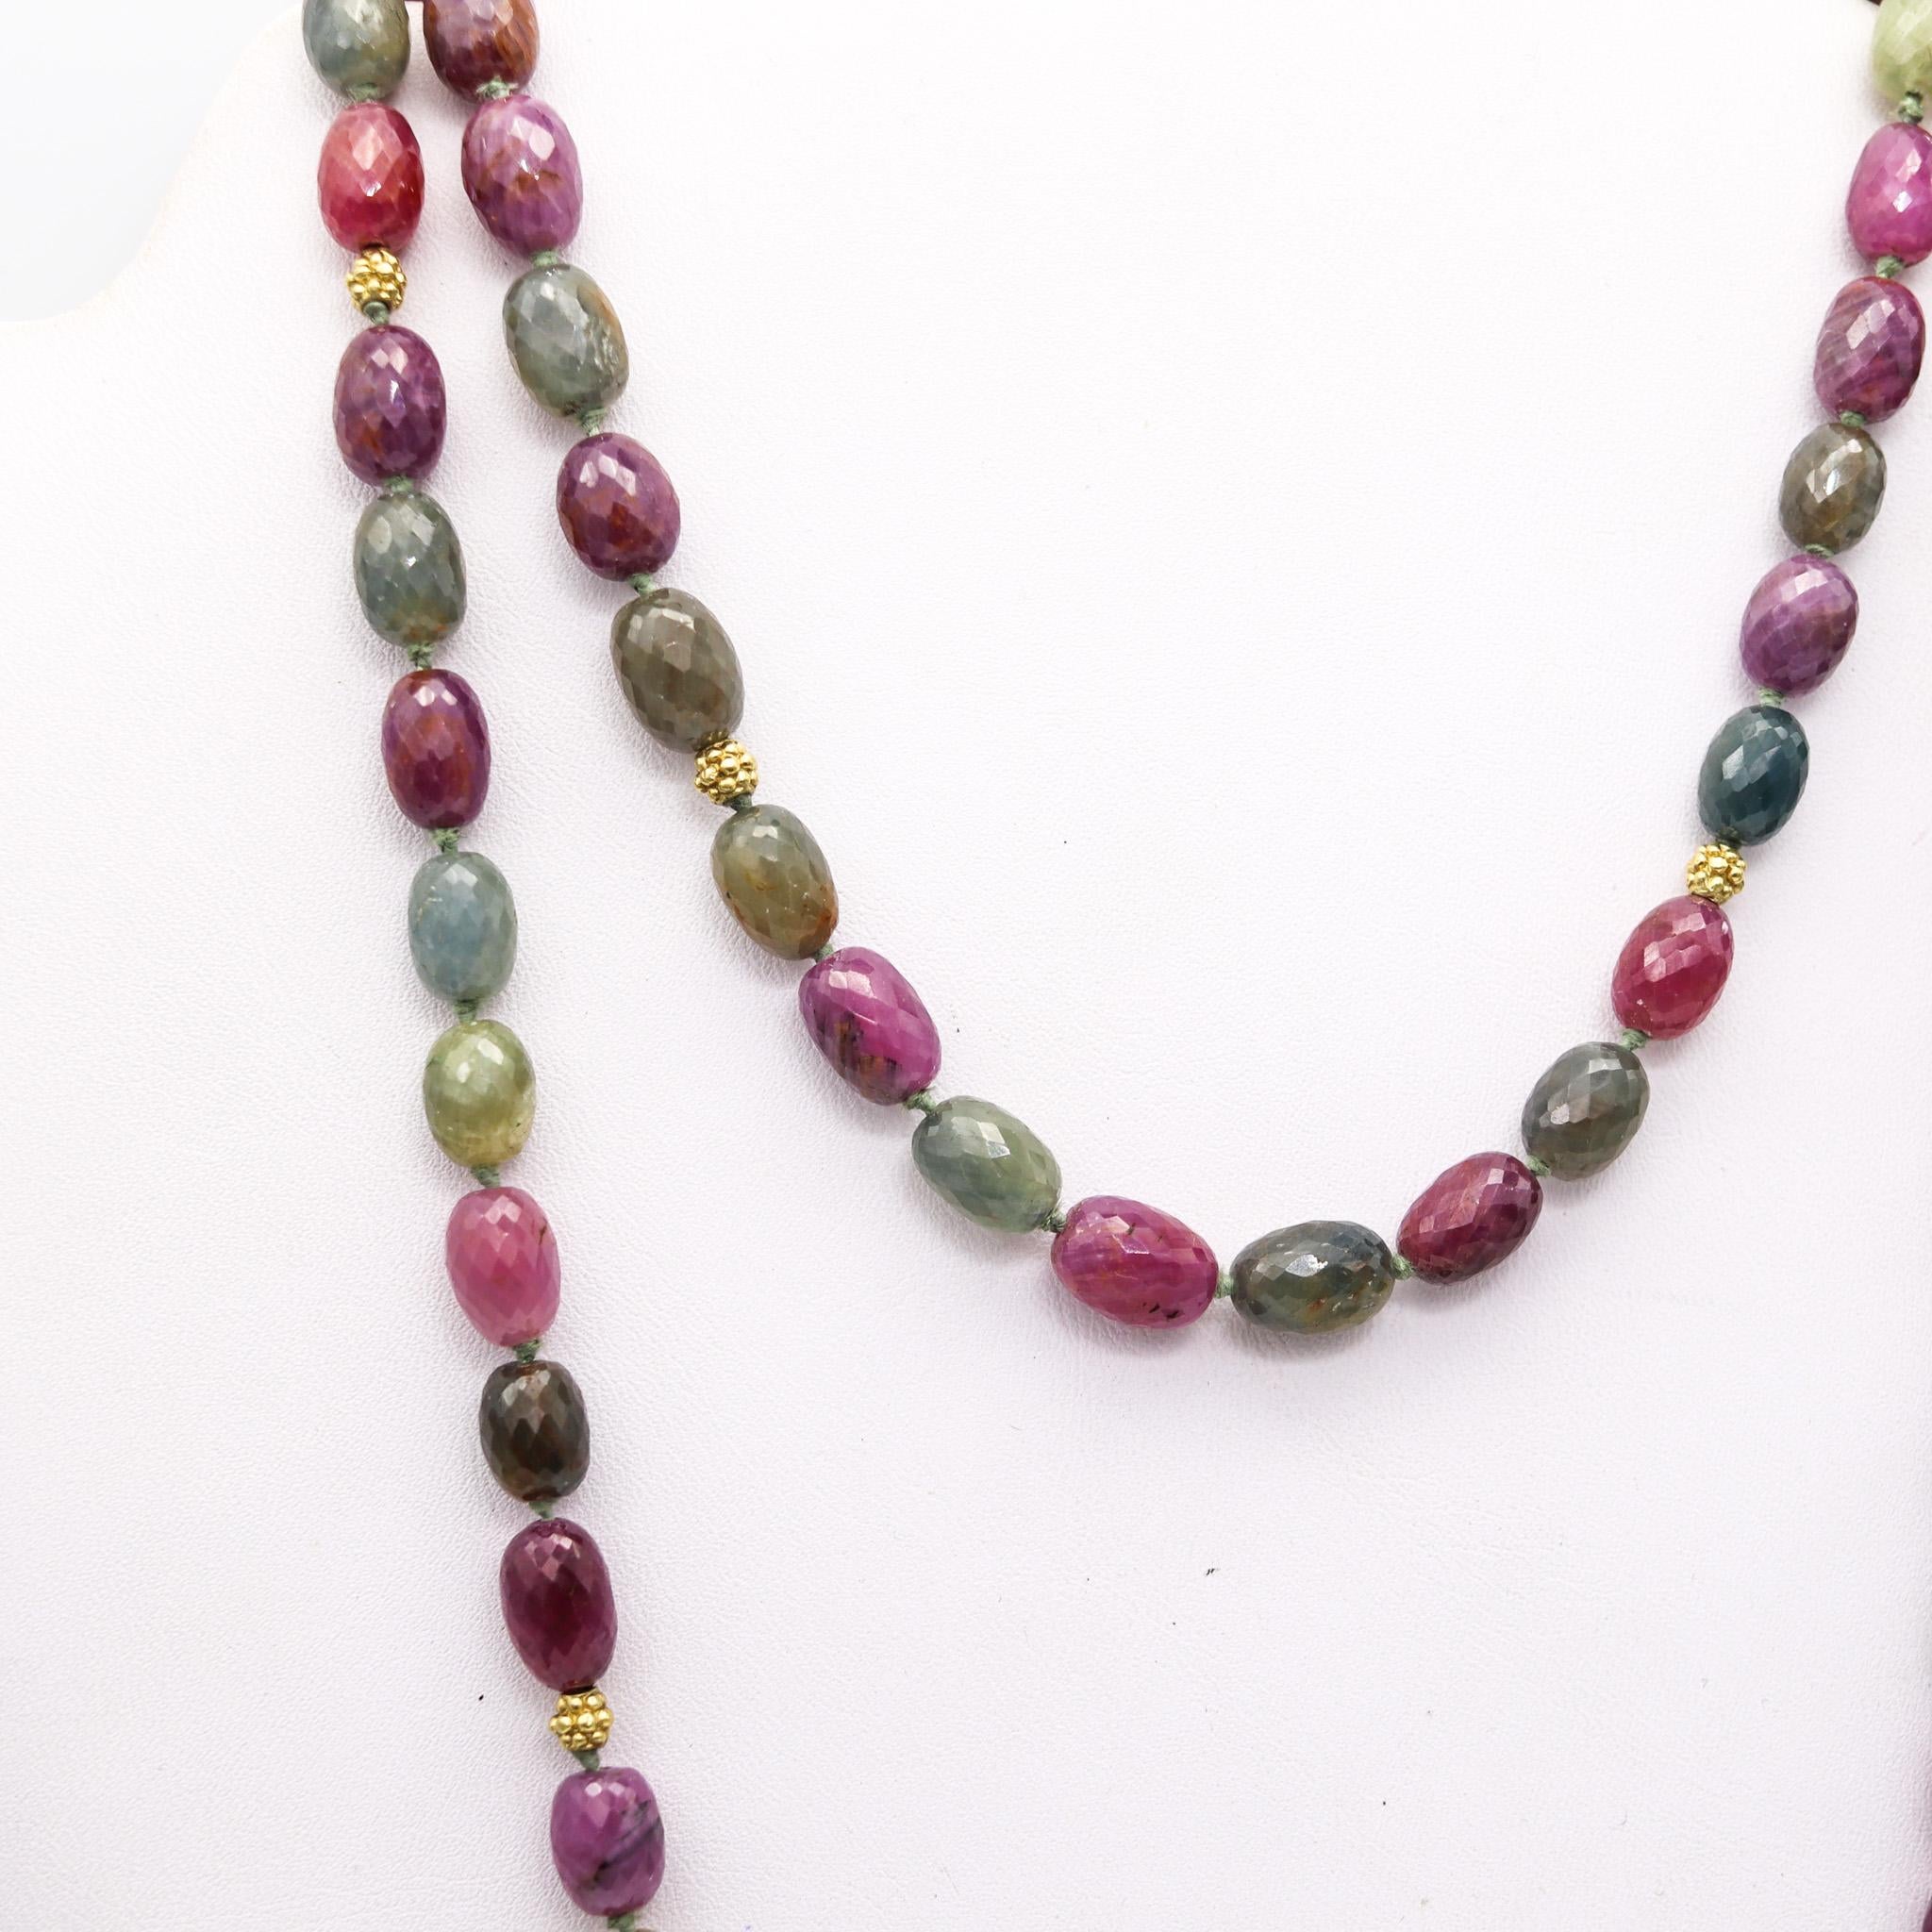 A long necklace sautoir with color sapphires.

A versatile long necklace sautoir, crafted in Italy with 18 karats yellow gold stations and seventy-nice carved natural sapphires of diverse colors such; pink, green, light blue and purple. Fitted with